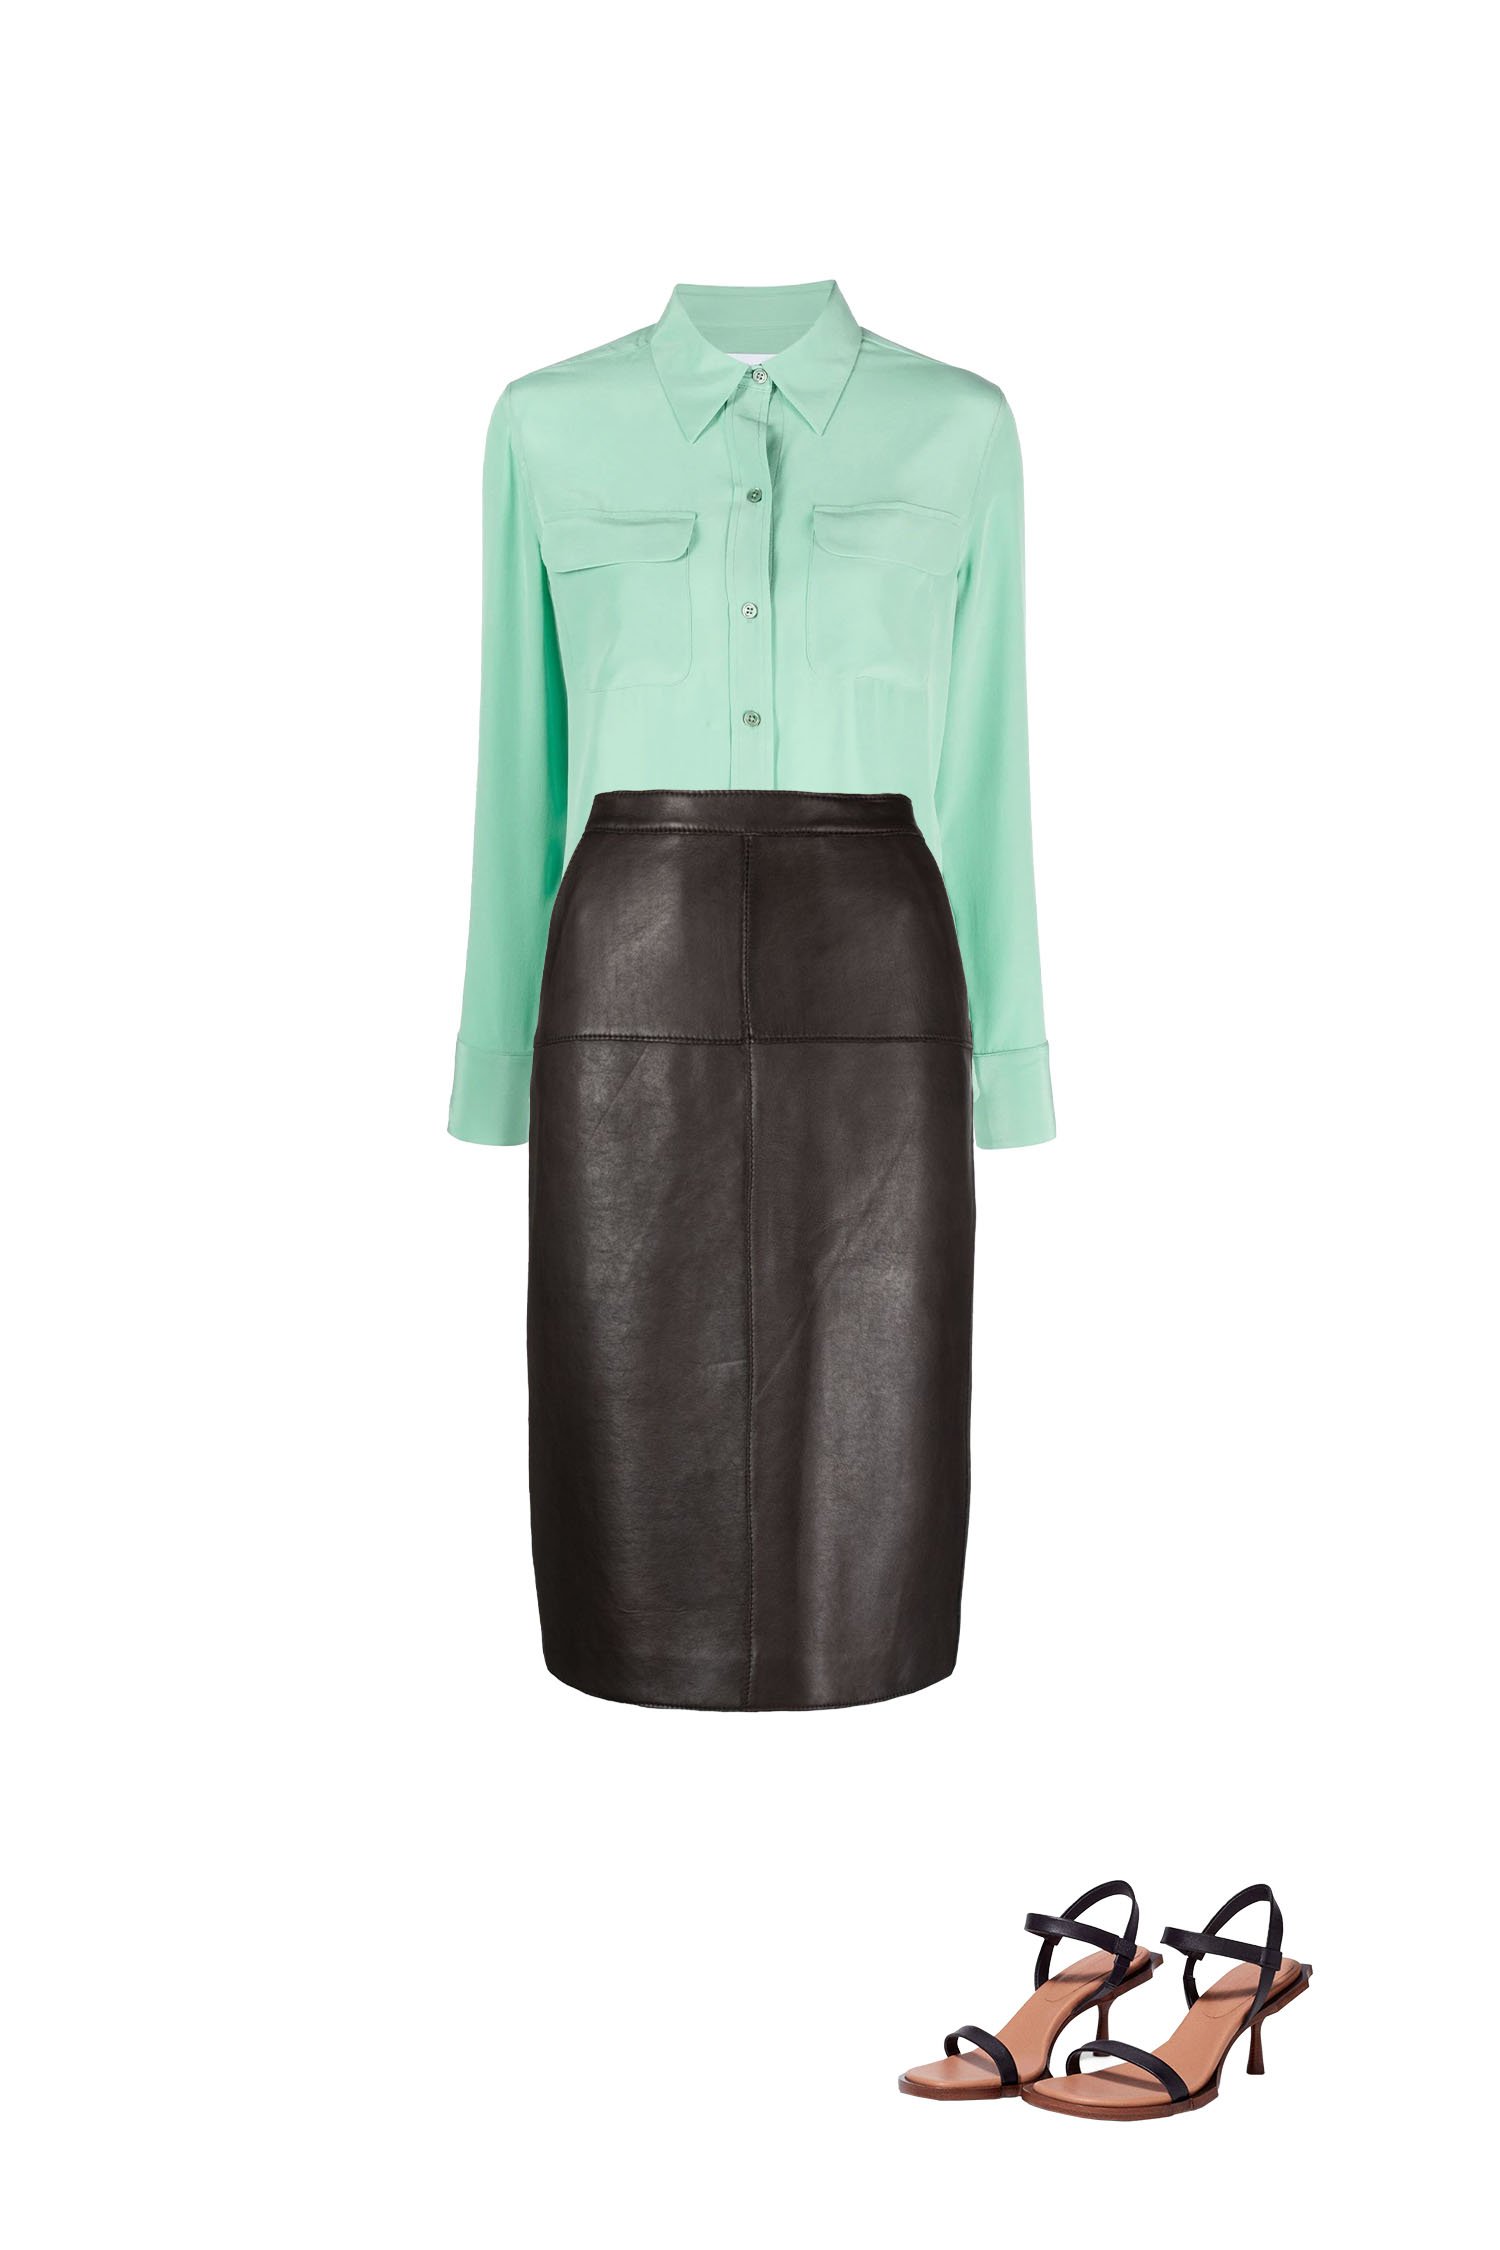 Black Leather Pencil Skirt Outfit with Mint Silk Shirt and Black Heeled Sandals